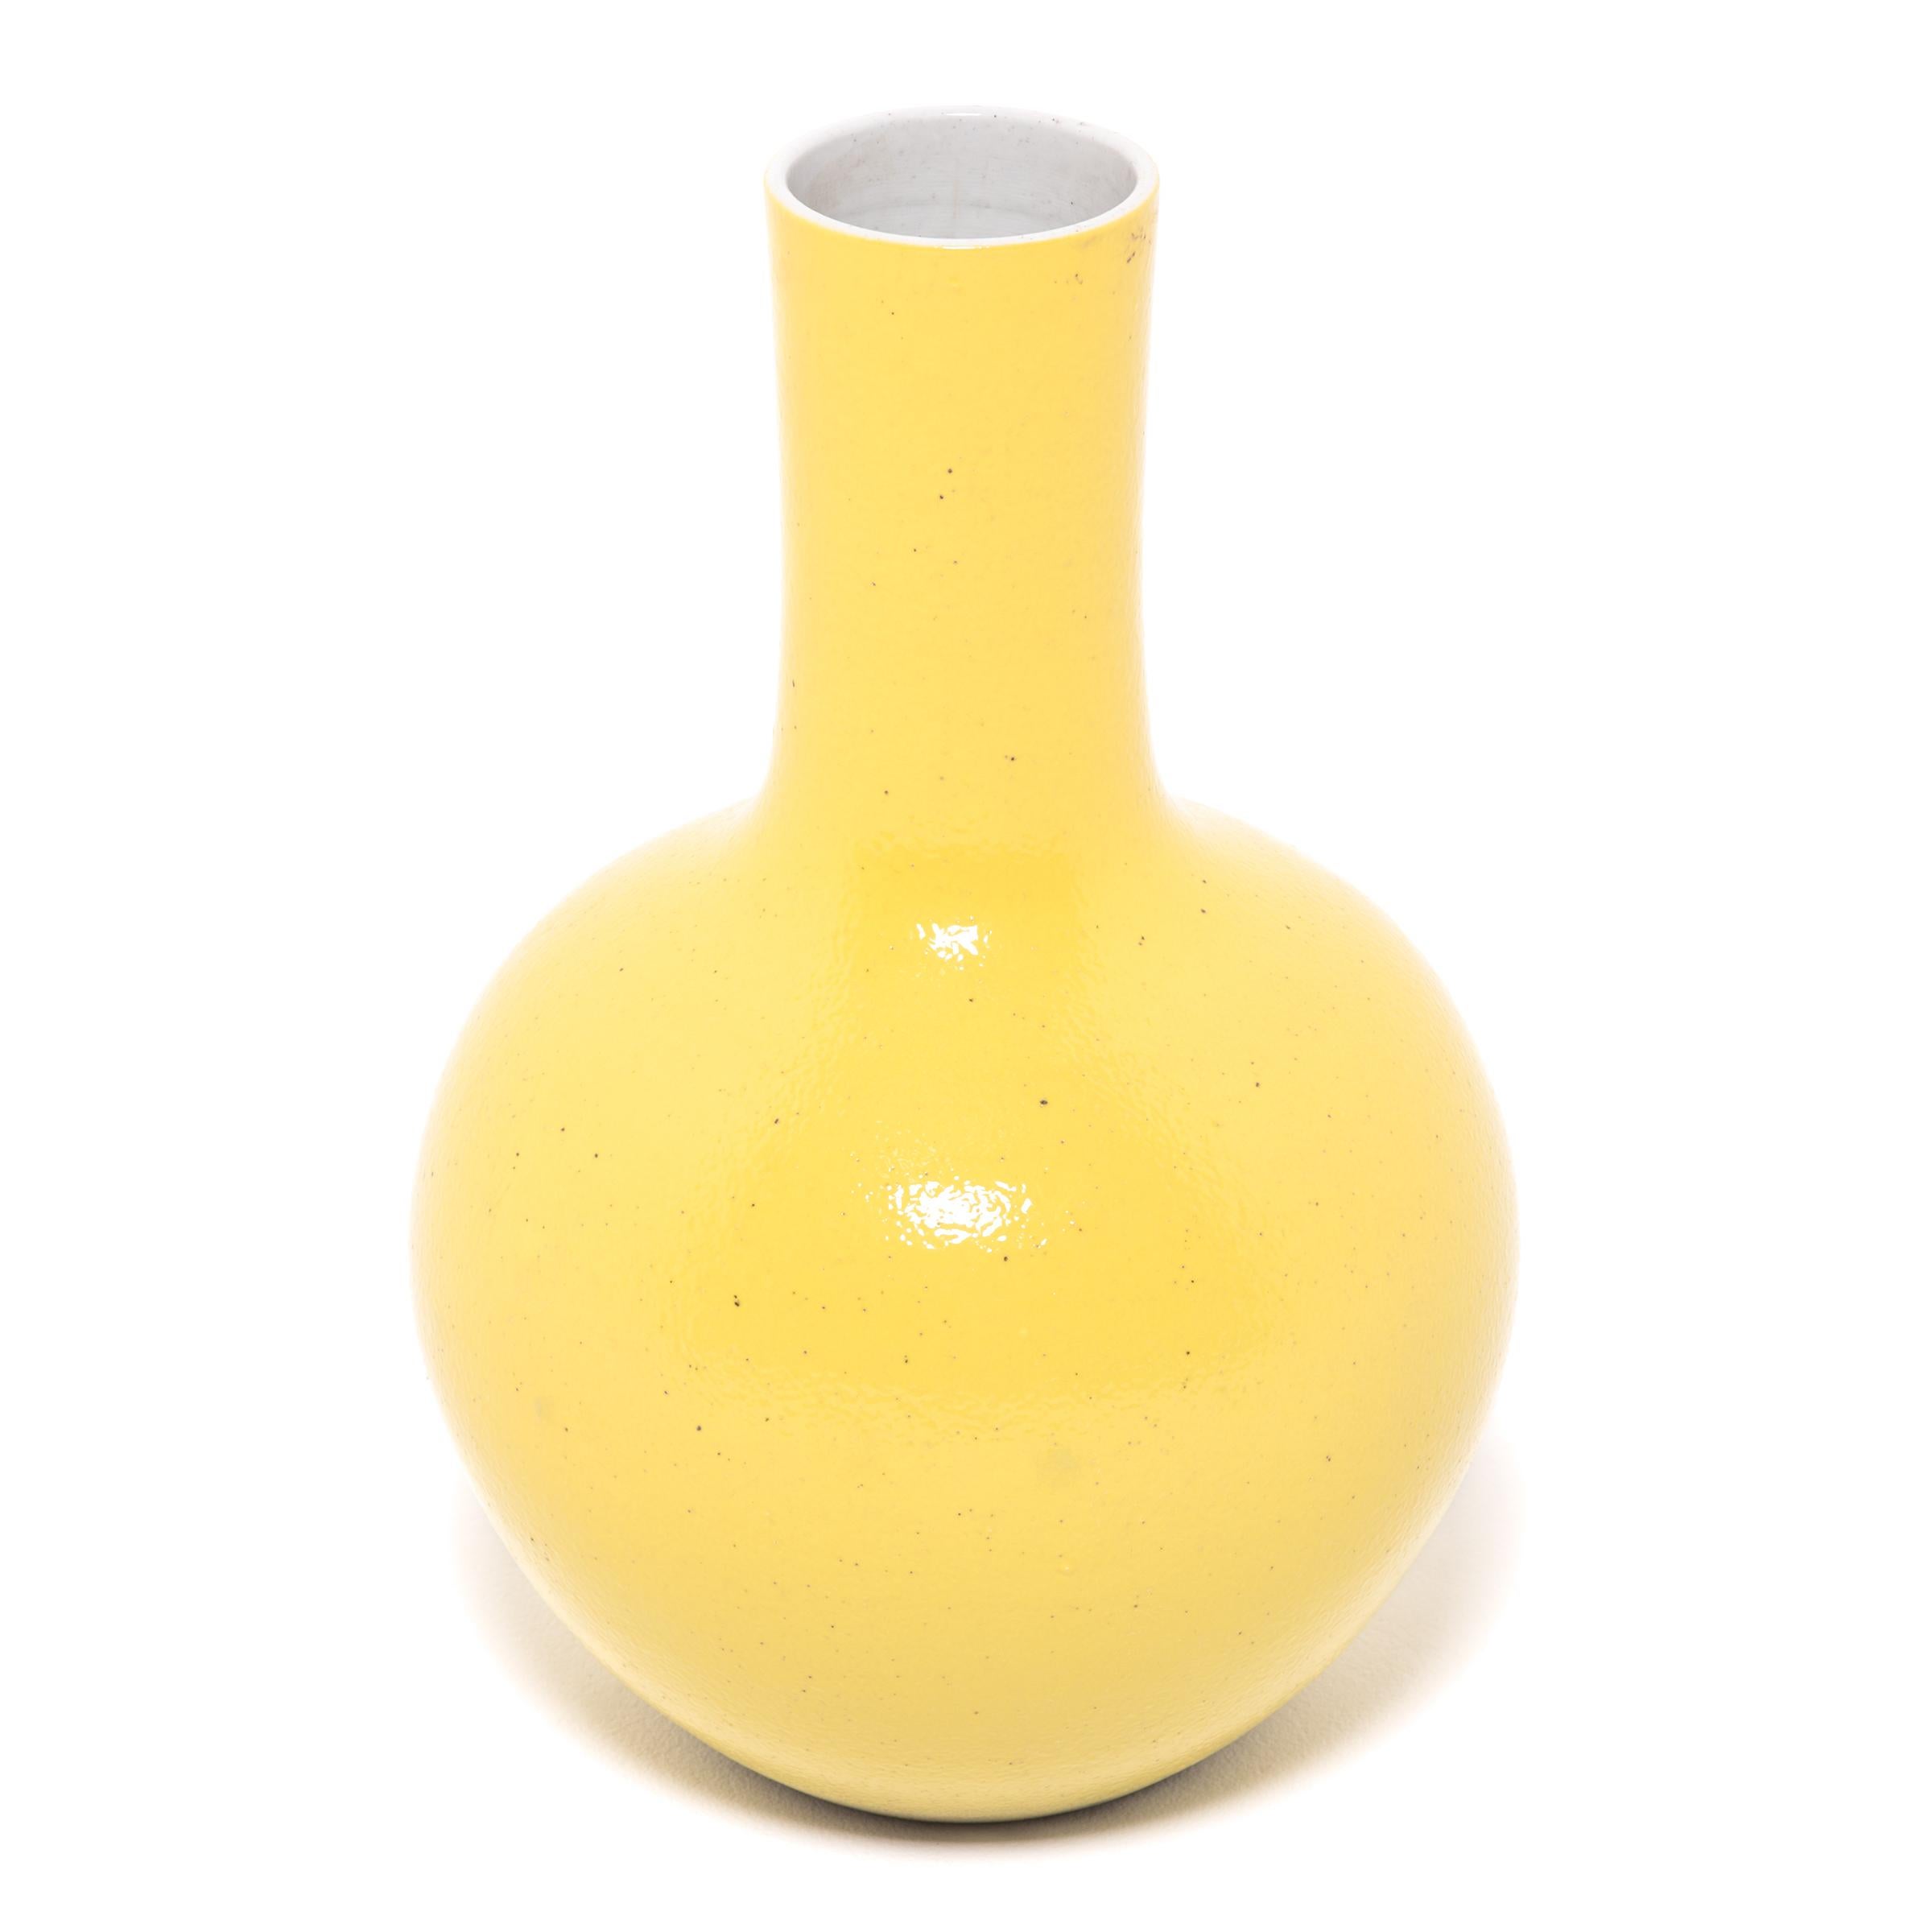 Drawing on a long Chinese tradition of ceramics, this striking long-necked vase is cloaked in an all-over citron-yellow glaze. With a rounded, globular body and cylindrical neck, the large vase reinterprets the traditional gooseneck shape known as a